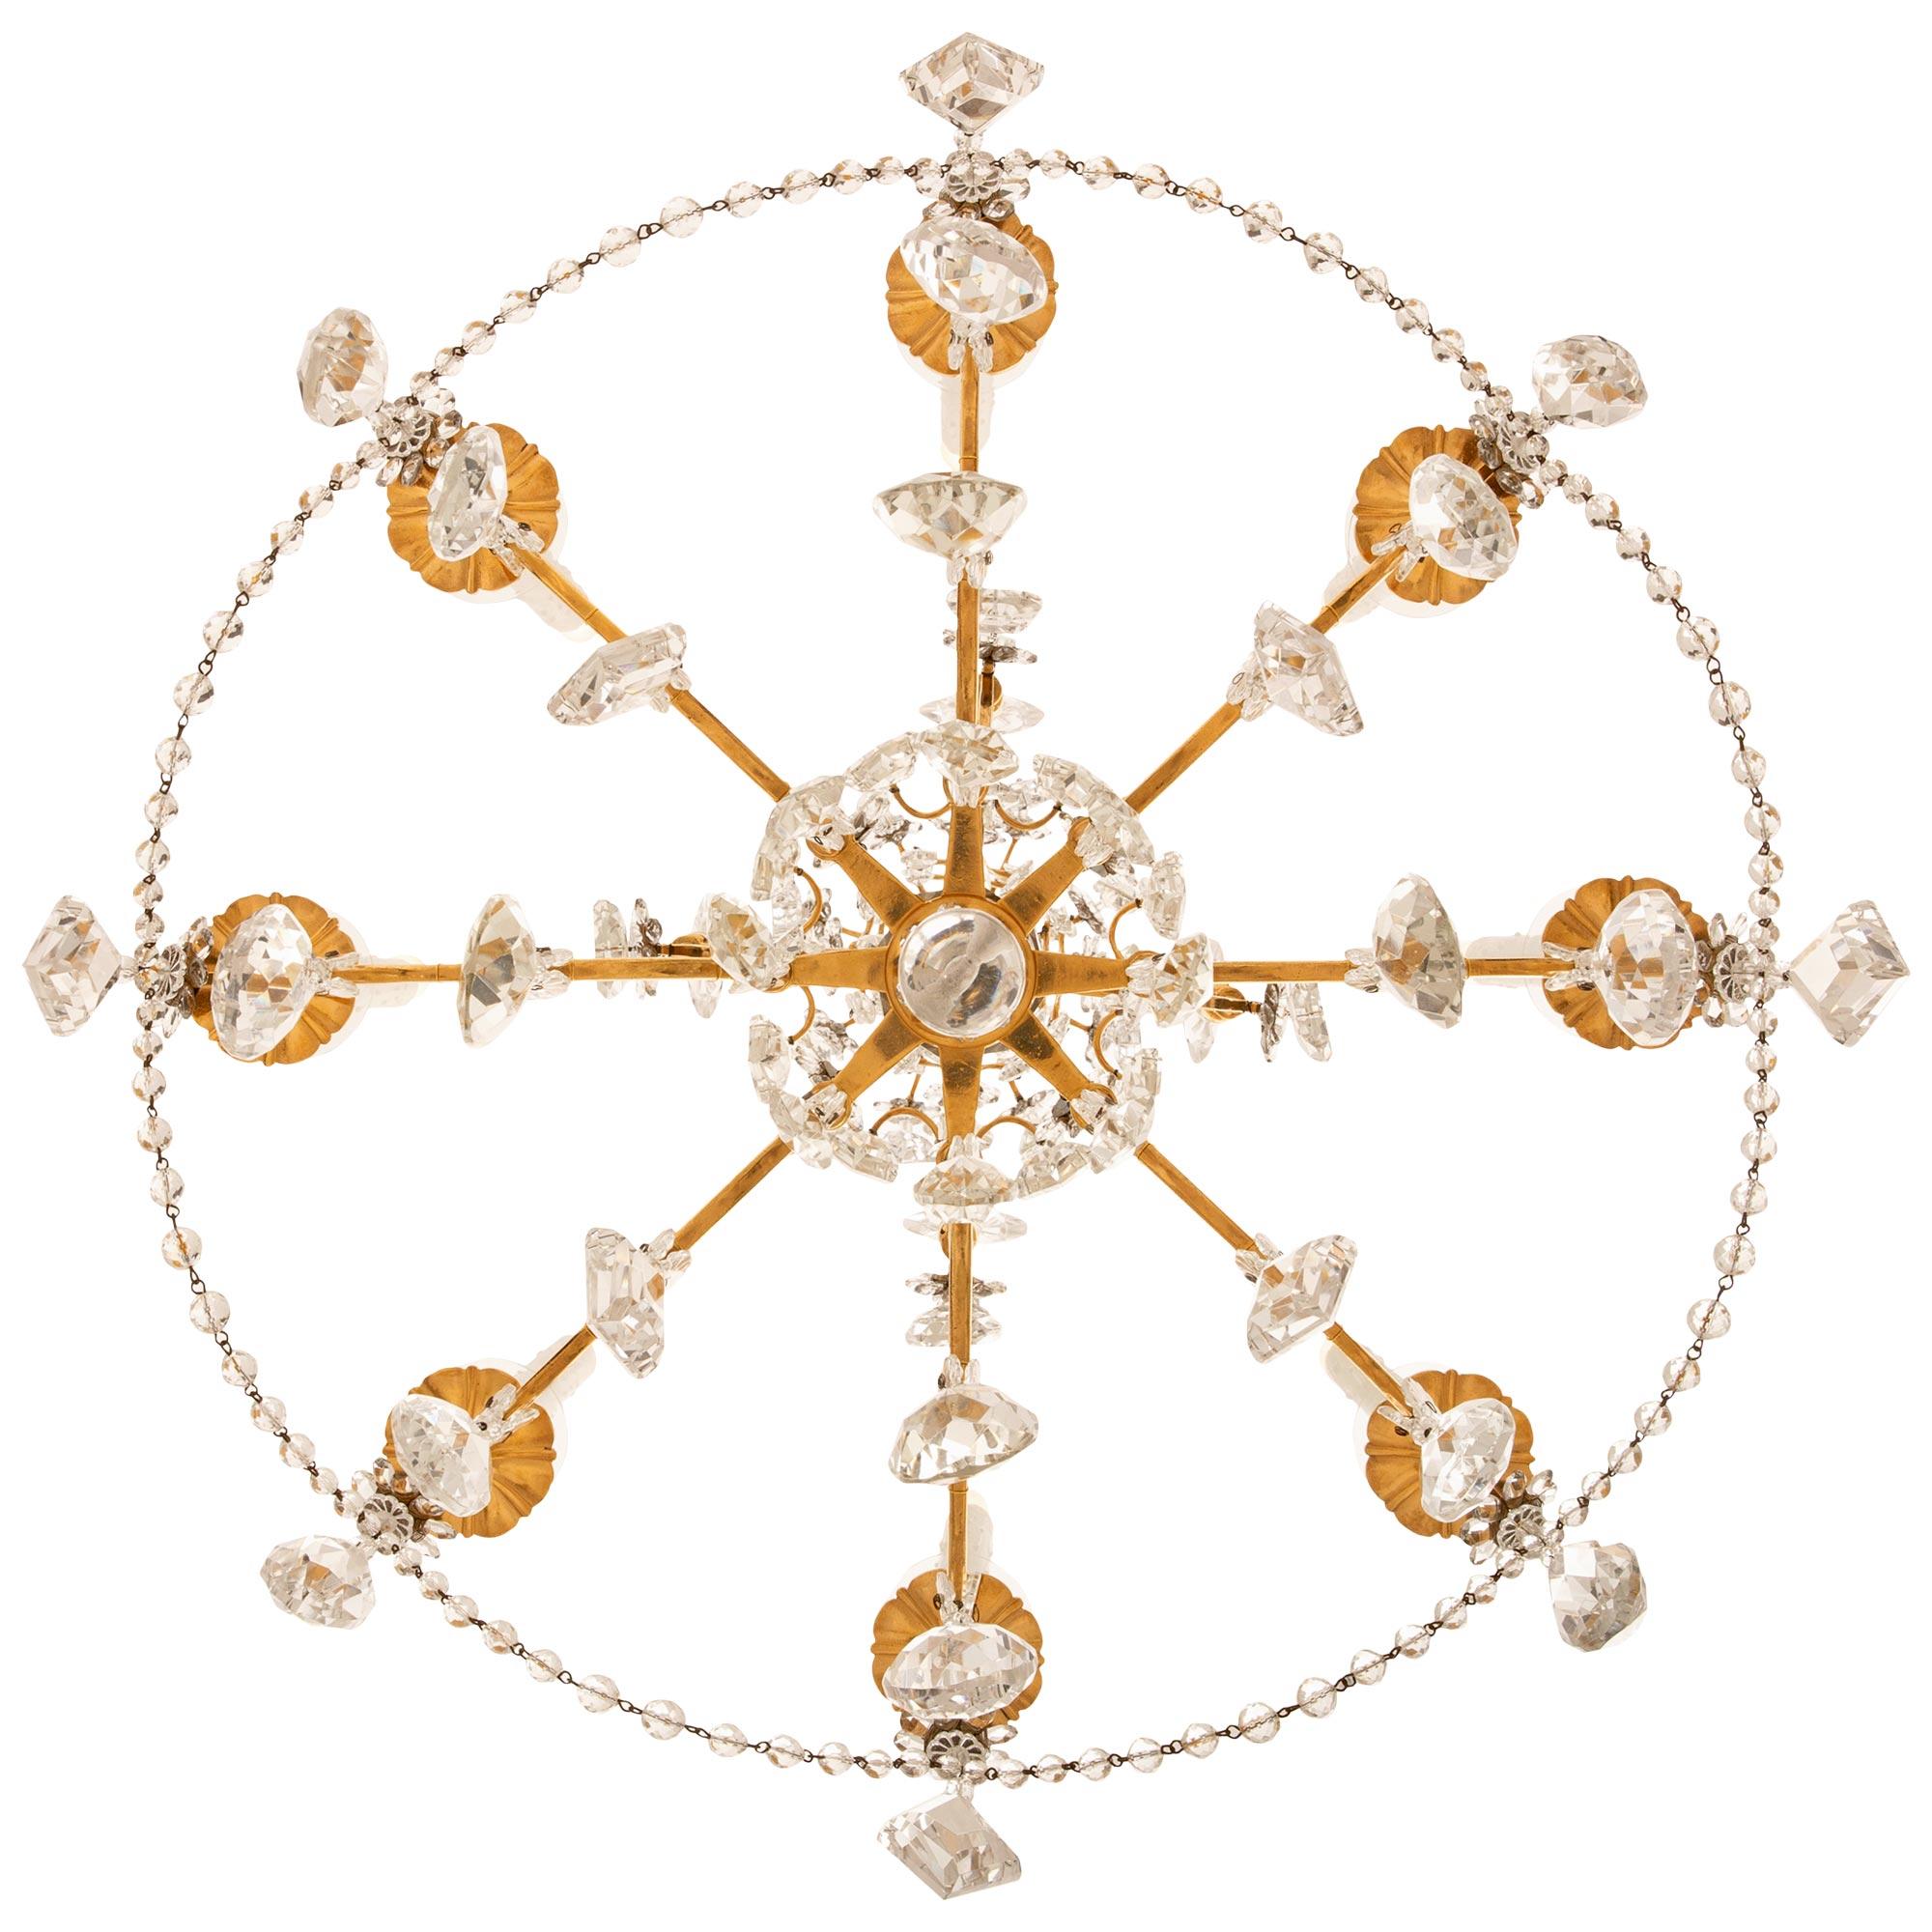 French 19th century Louis XVI st. Ormolu and Baccarat Crystal chandelier For Sale 5